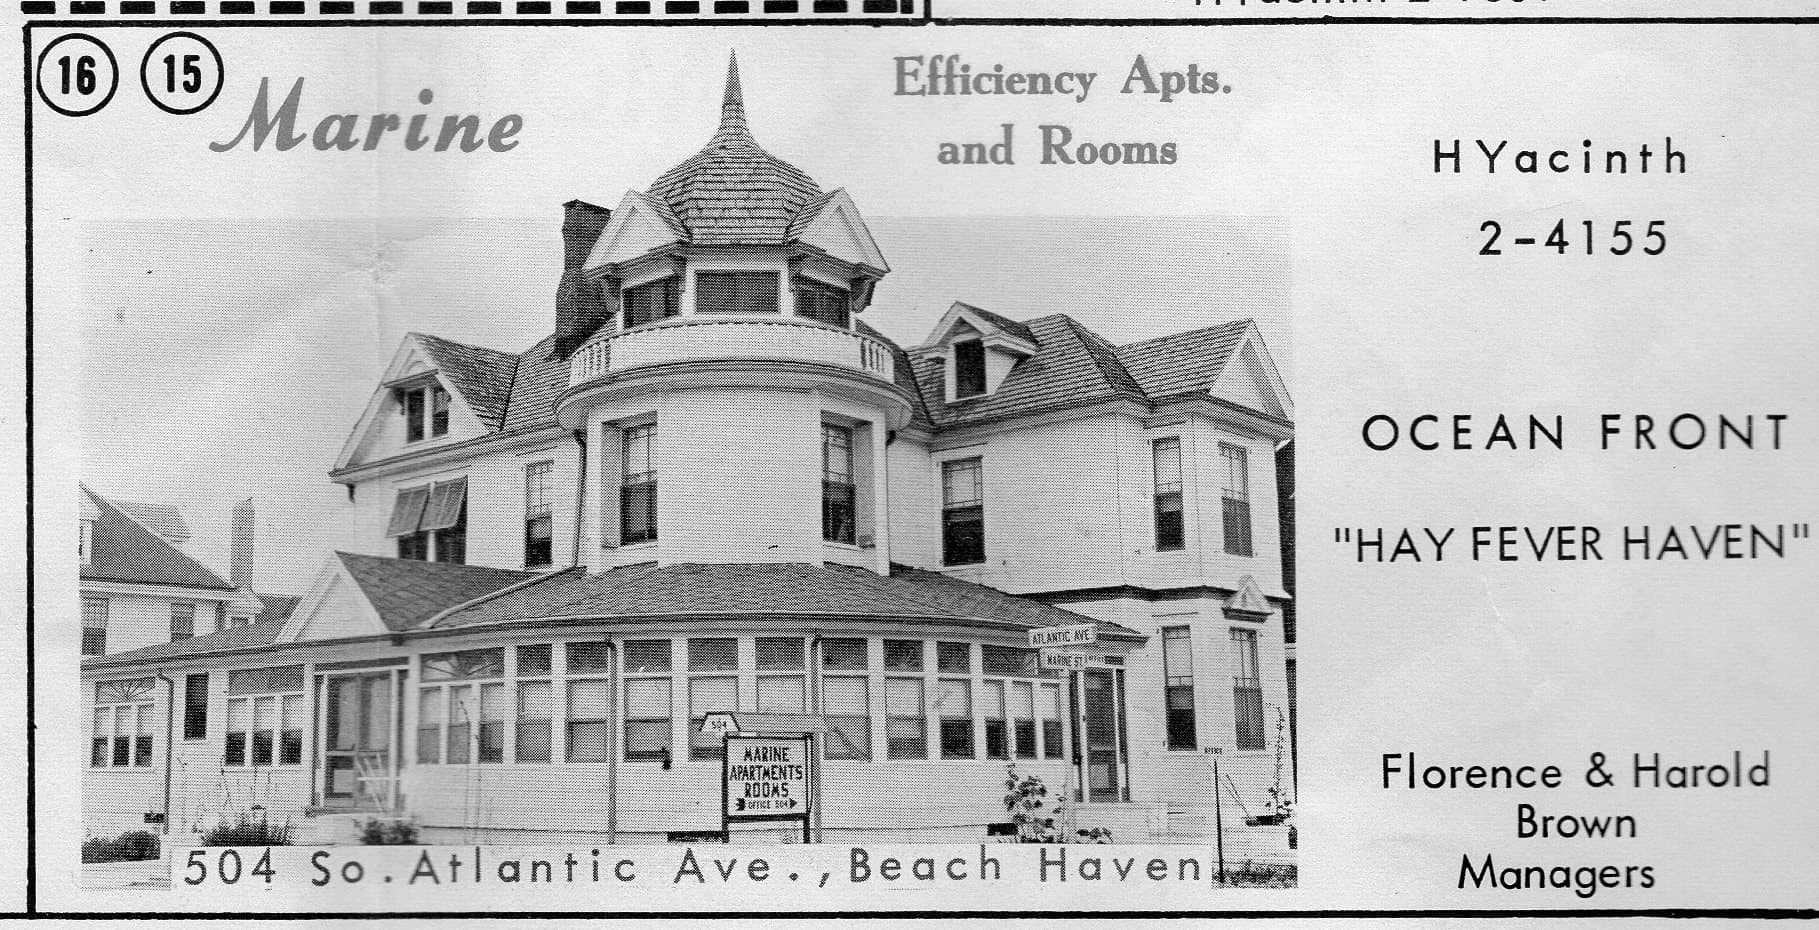 1963 ad for Marine Efficiency Apartments and Rooms in Beach Haven, NJ